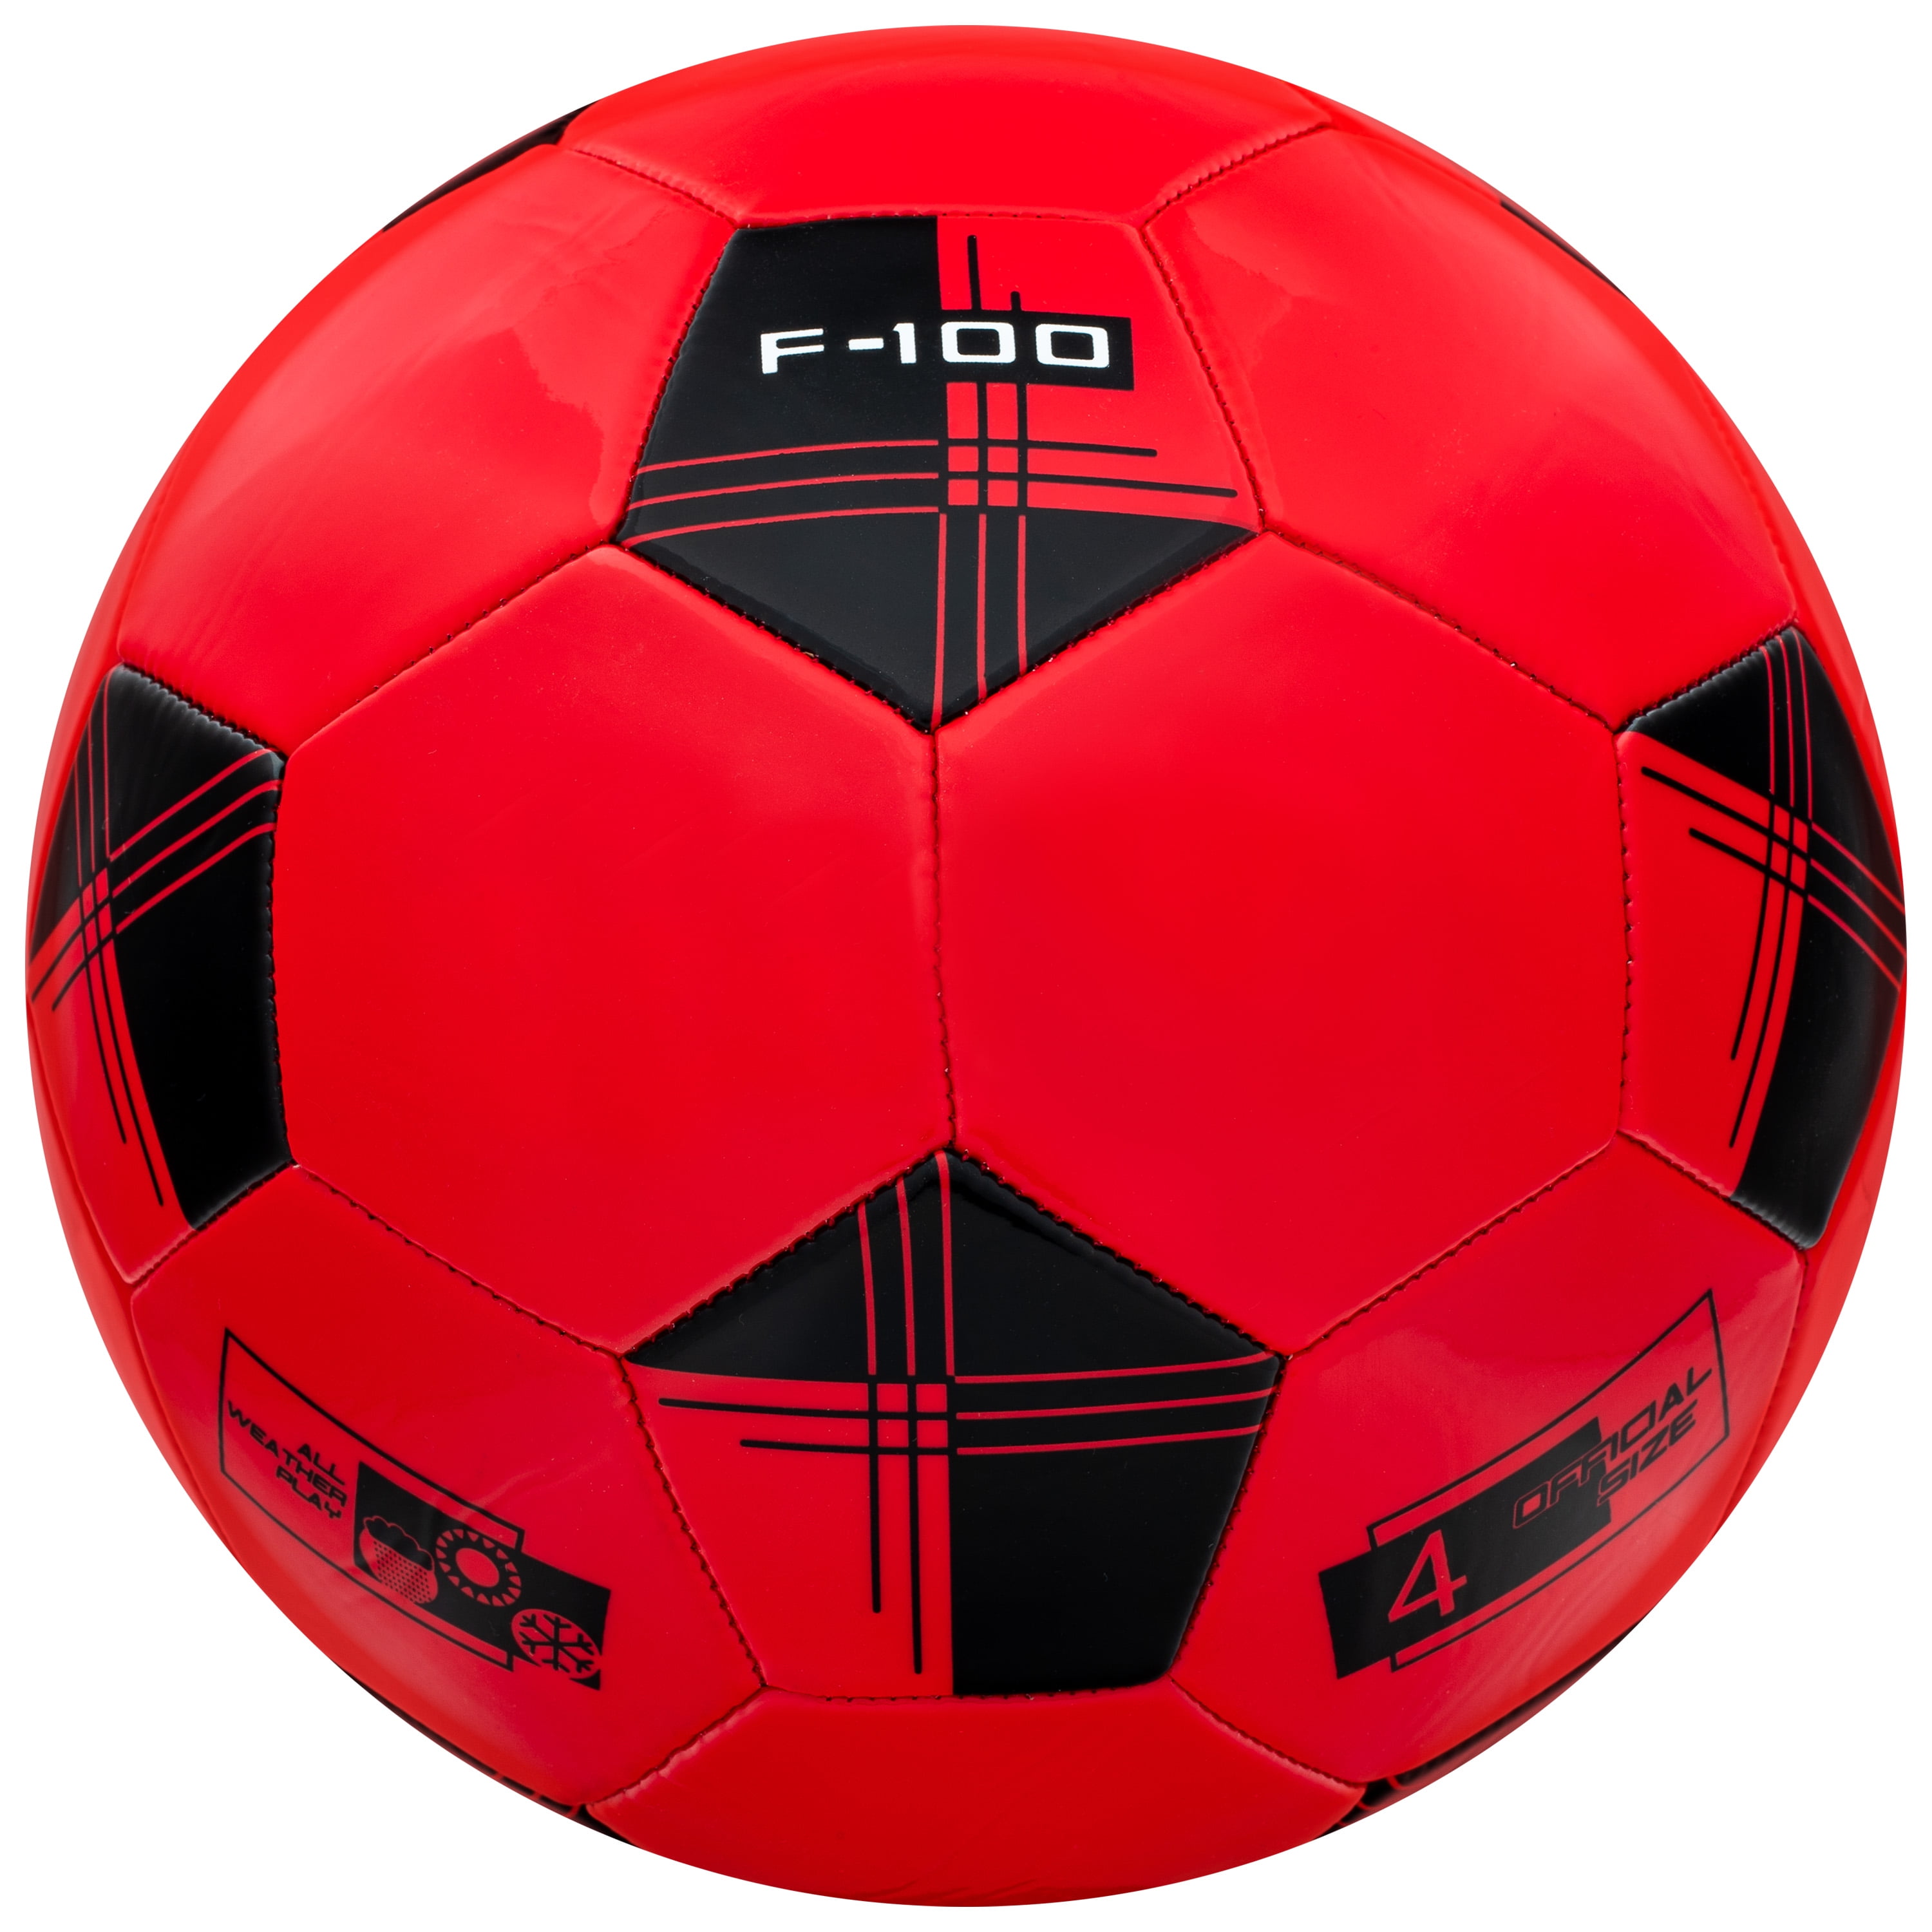 Franklin Sports Comp 1000 Soccer Ball Size 4 